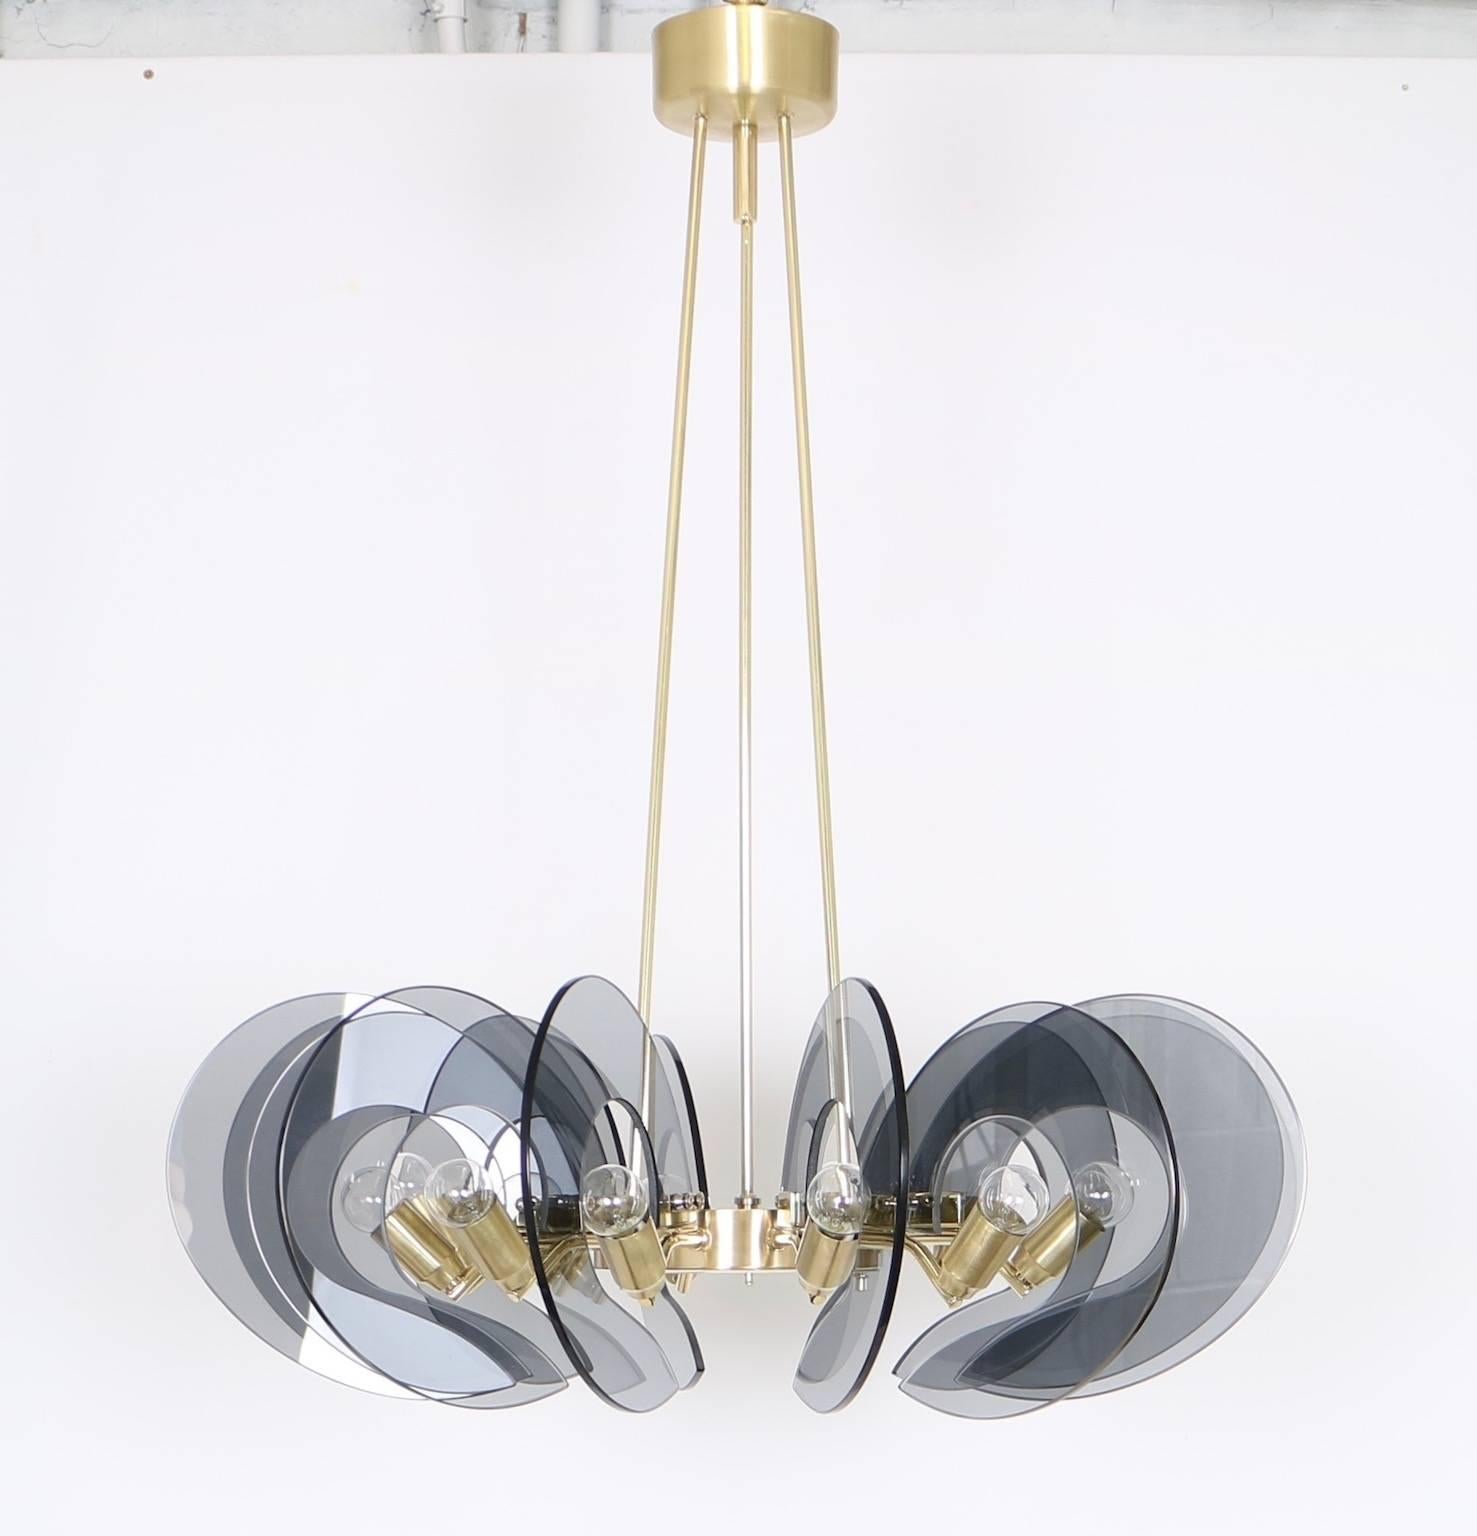 12 light chandelier, attributed to Fontana Arte, manufactured in Italy circa 1950s, brass ring frame with brushed and polished finishes, holding in suspension blue-tinted glass semi-circle panels. Completely restored and adapted to US standard,